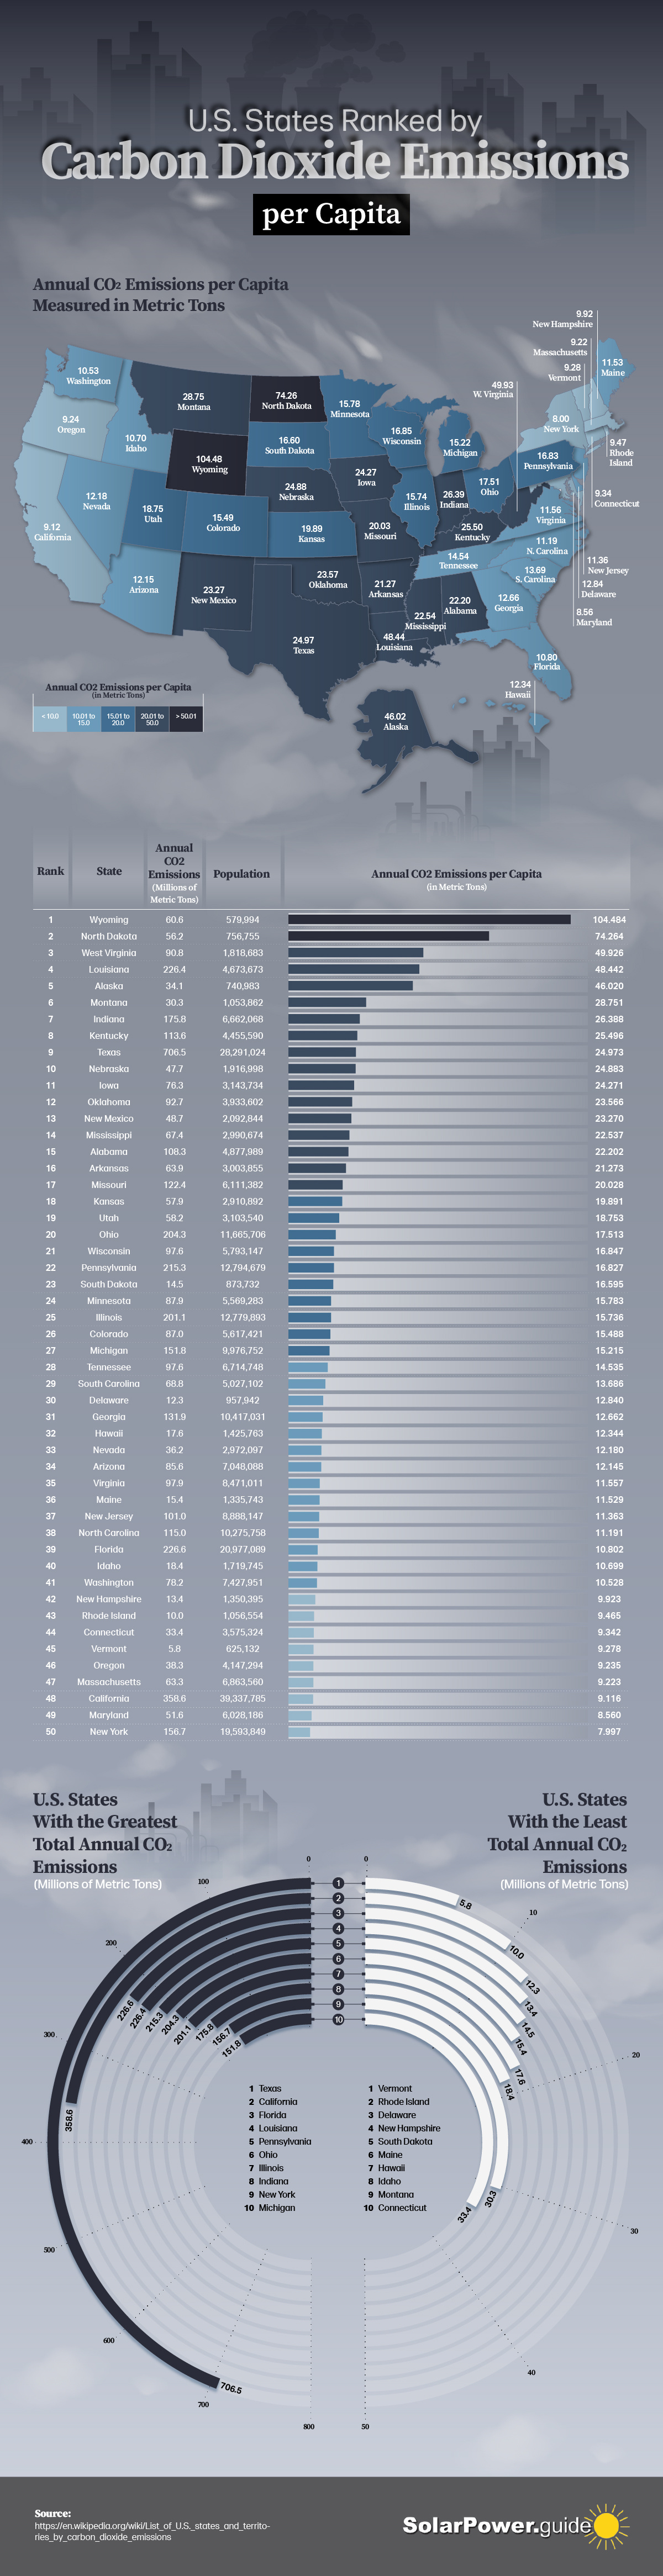 U.S. States Ranked by Carbon Dioxide Emissions per Capita - Solar Power Guide - Infographic